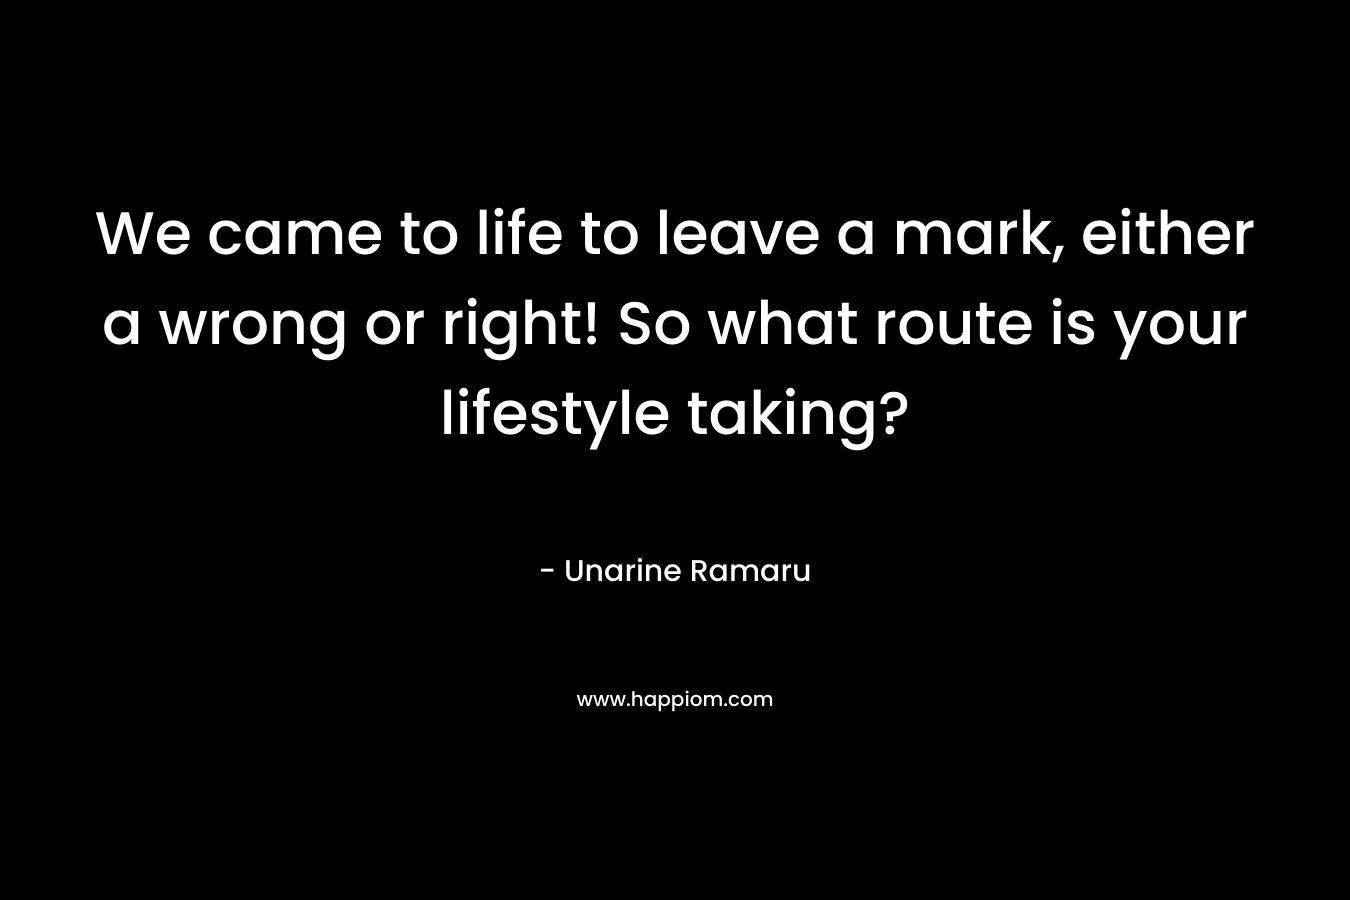 We came to life to leave a mark, either a wrong or right! So what route is your lifestyle taking? – Unarine Ramaru